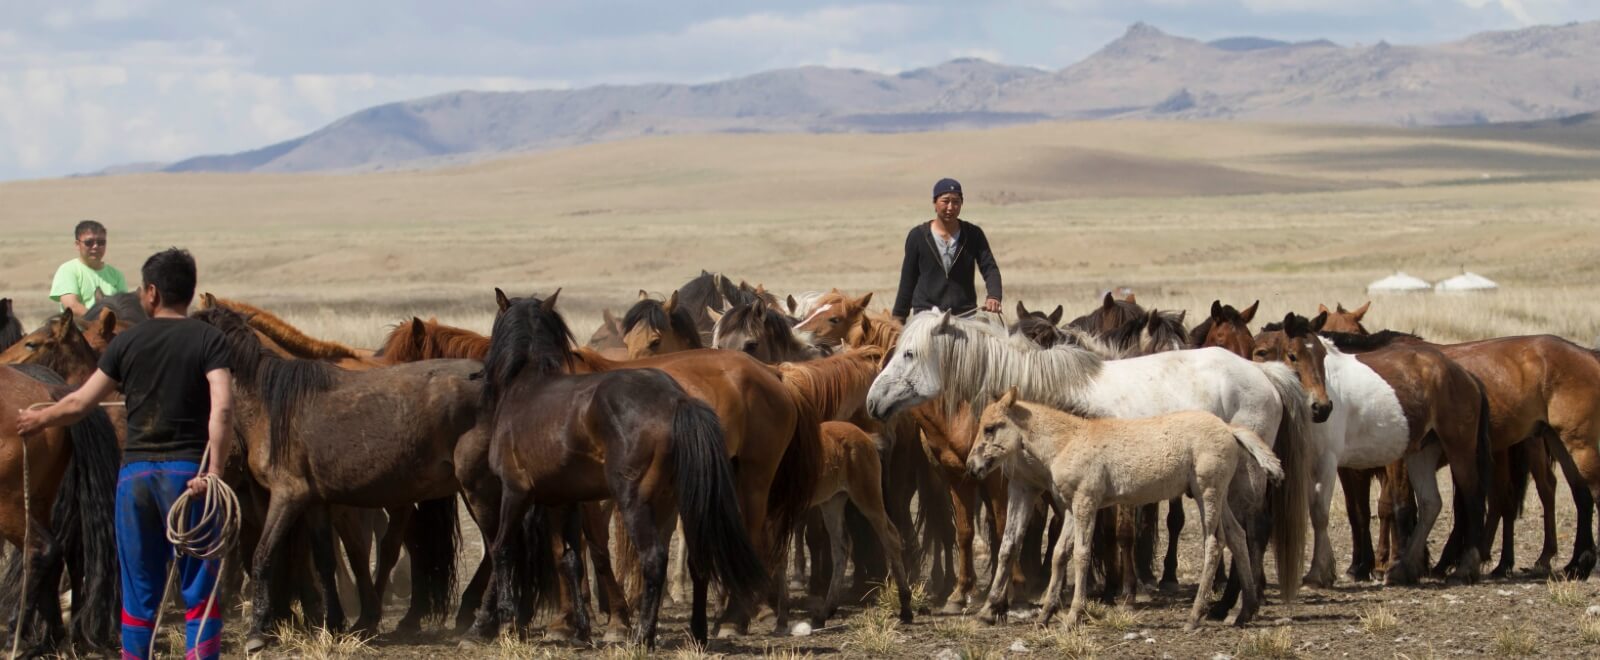 Young horse herd gather in the grasslands of Mongolia